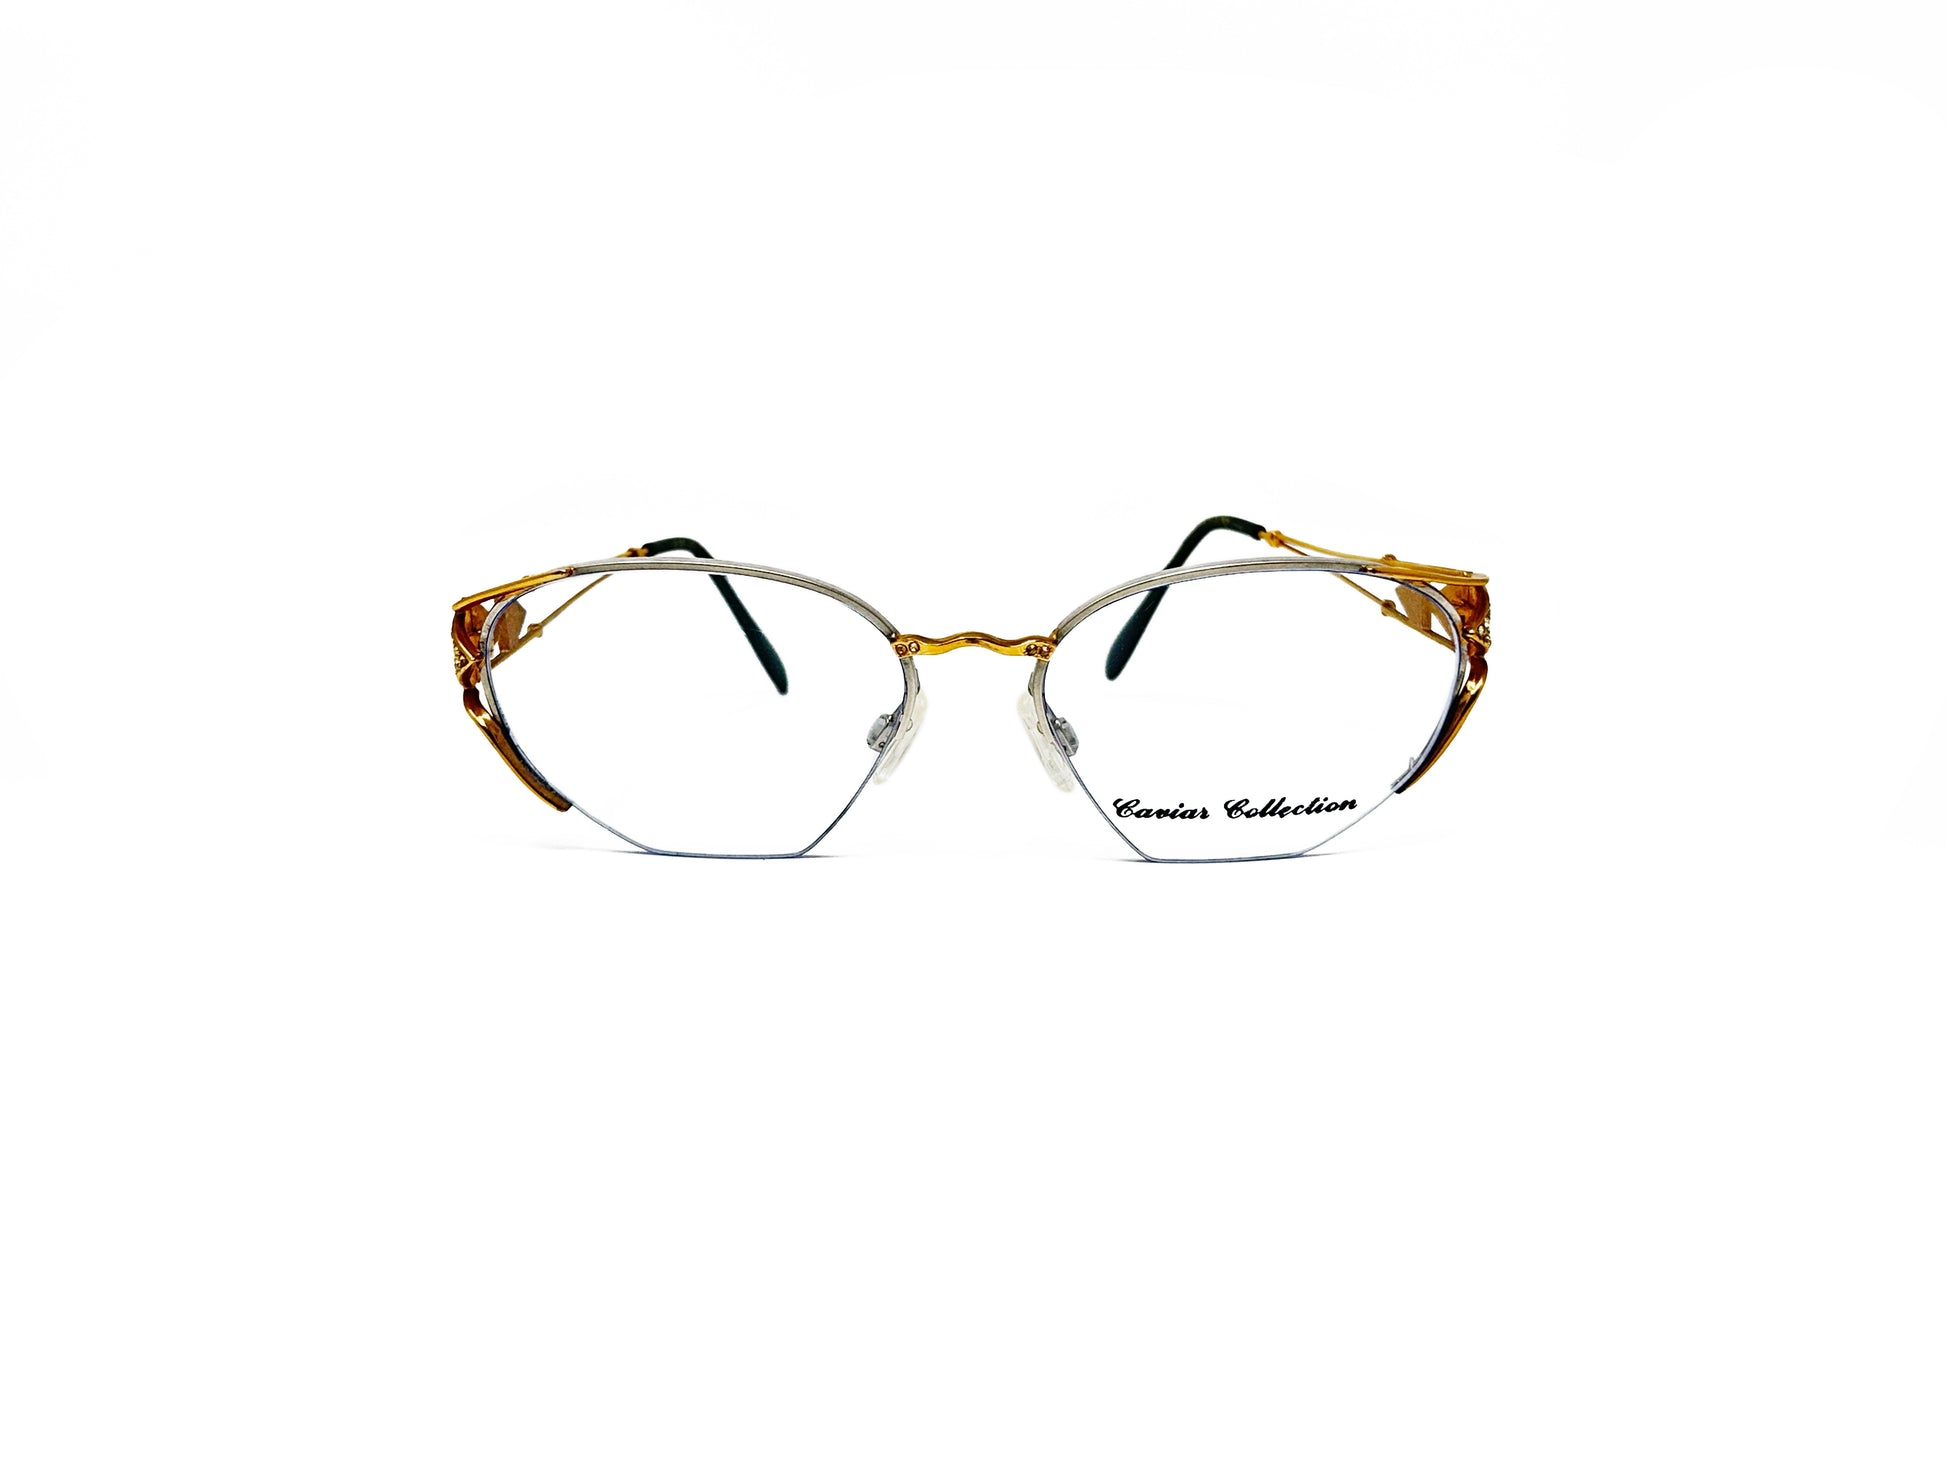 Ultra half-rim optical frame with metal ornate temples and wavy nose bridge. Model: 1893. Color: 25 Gold. Front view. 